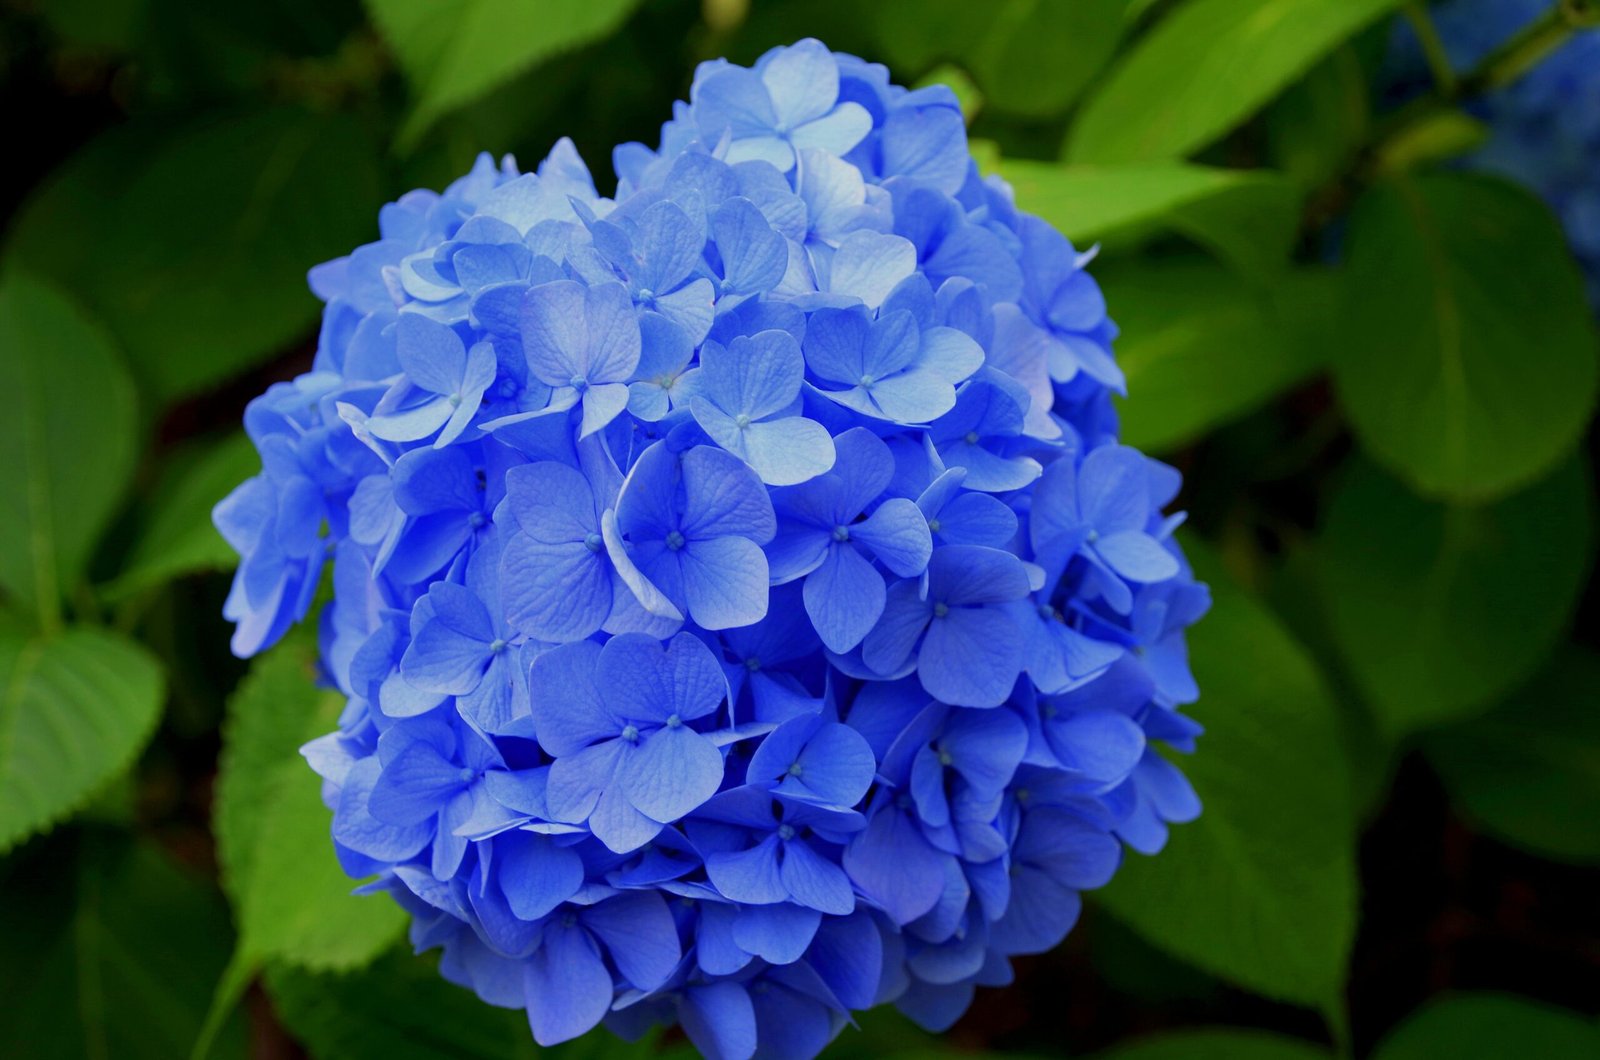 HYDRANGEA CARE AND QUERIES